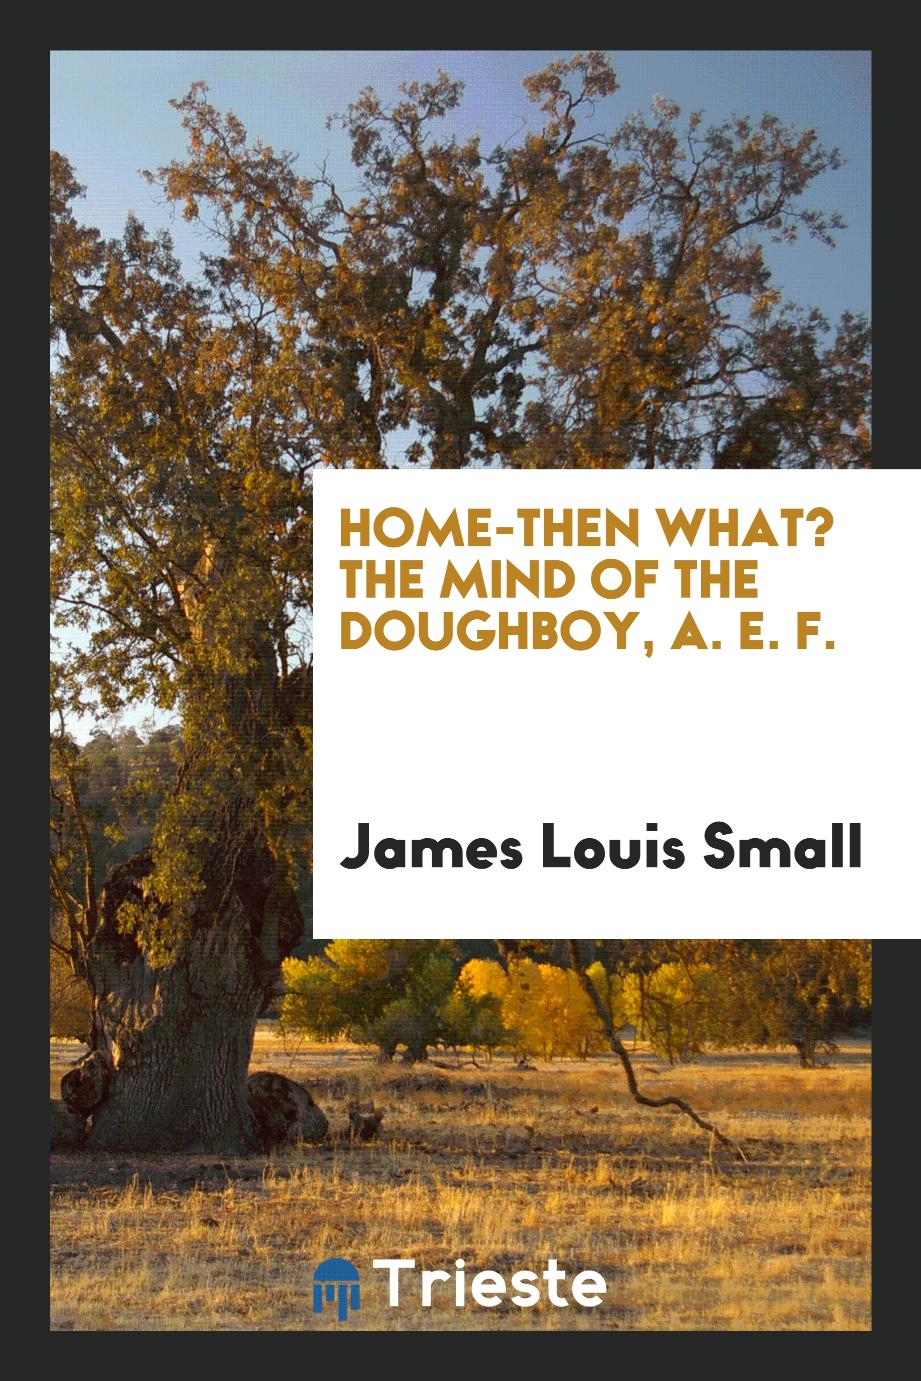 Home-then what? The mind of the doughboy, A. E. F.